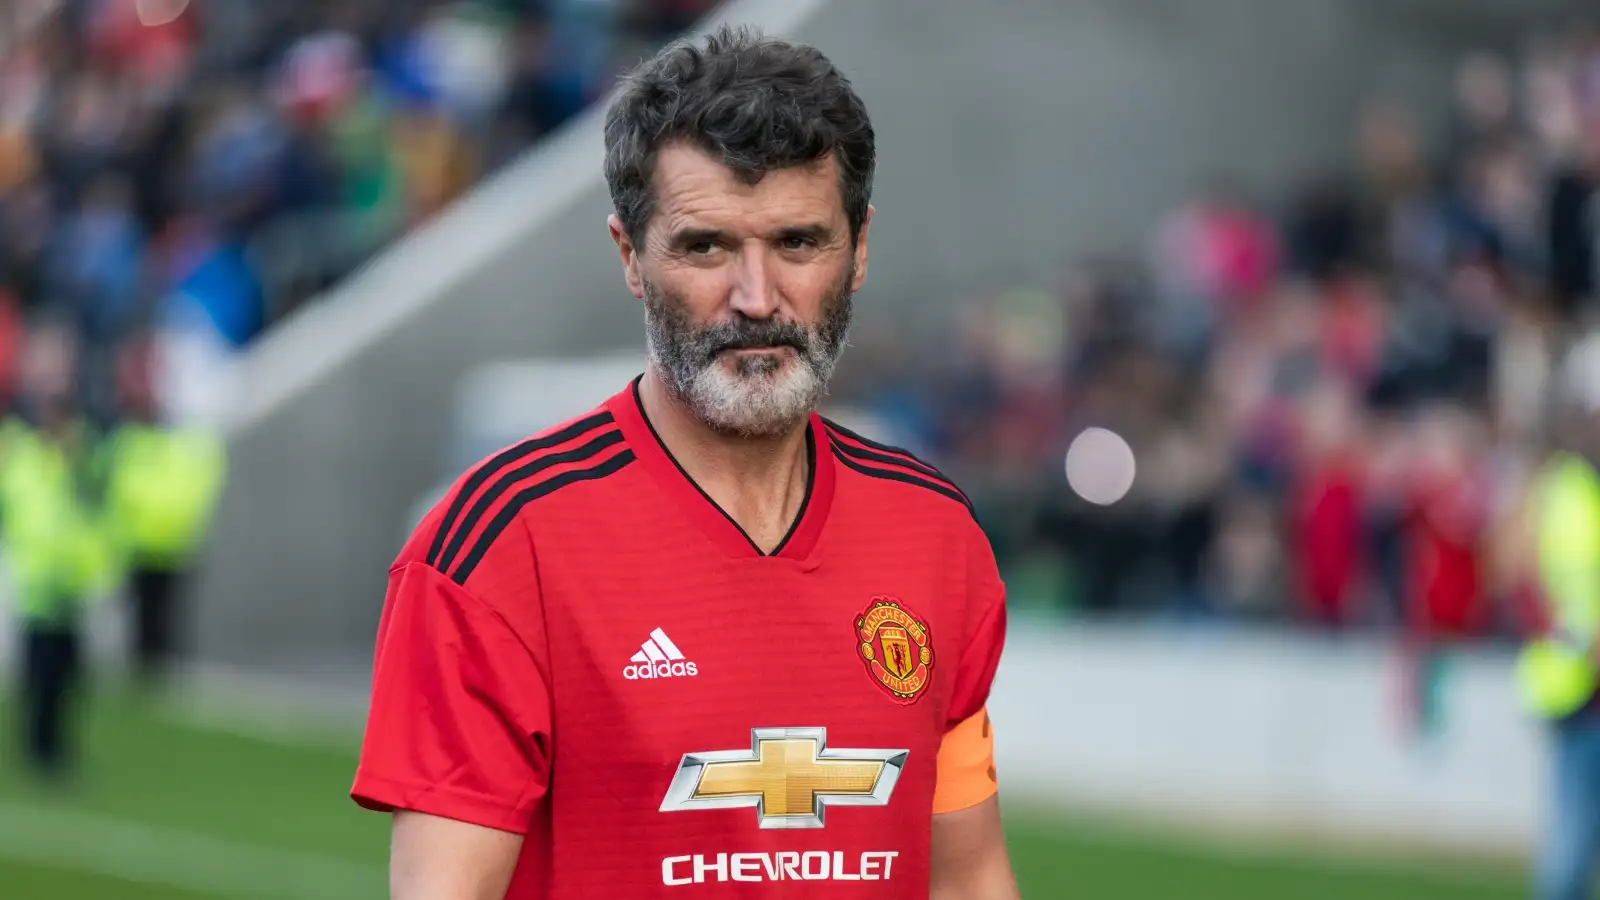 Watch: Roy Keane’s first date with his wife was absolutely hilarious